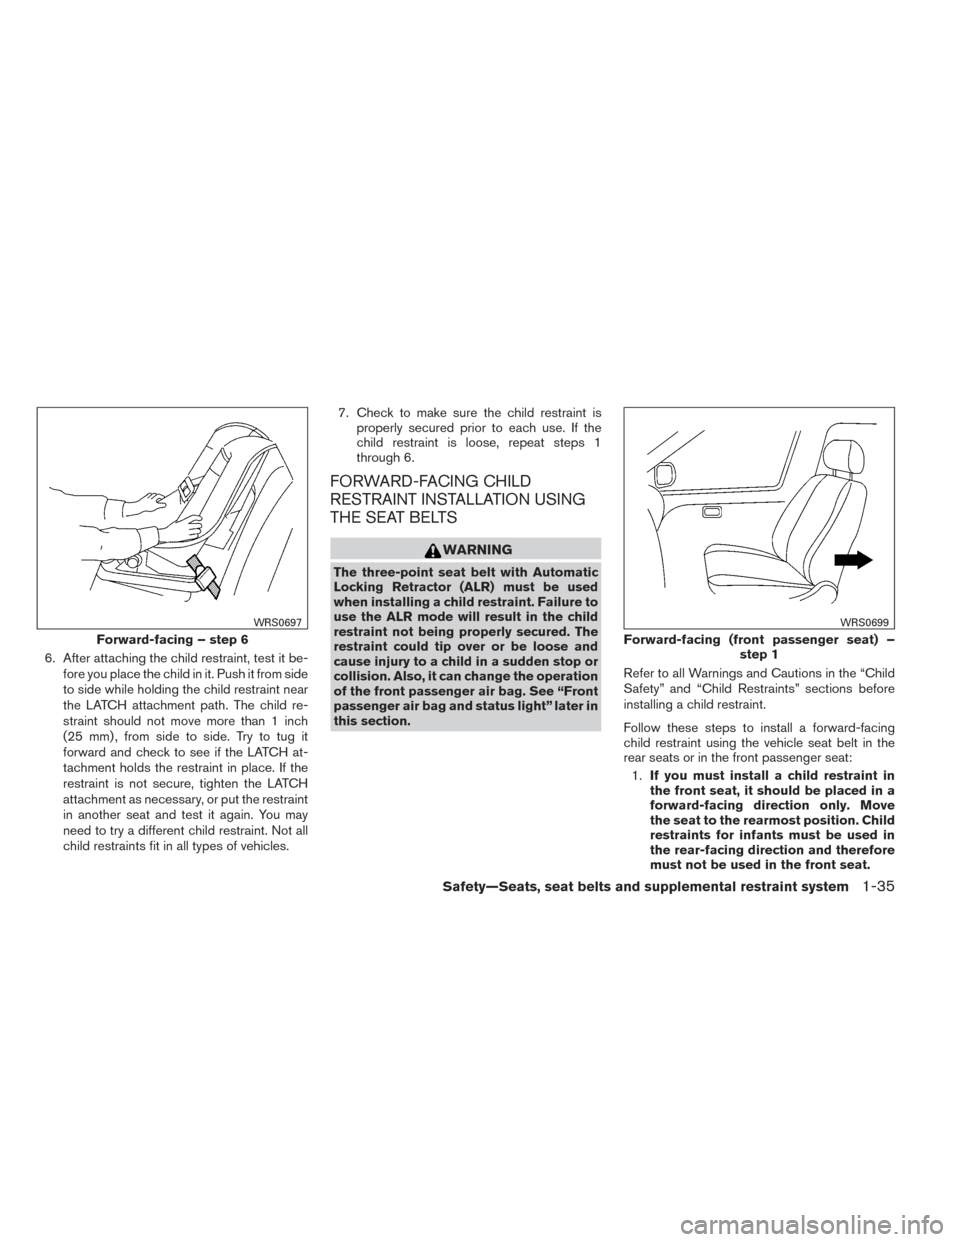 NISSAN MAXIMA 2014 A35 / 7.G Workshop Manual 6. After attaching the child restraint, test it be-fore you place the child in it. Push it from side
to side while holding the child restraint near
the LATCH attachment path. The child re-
straint sho